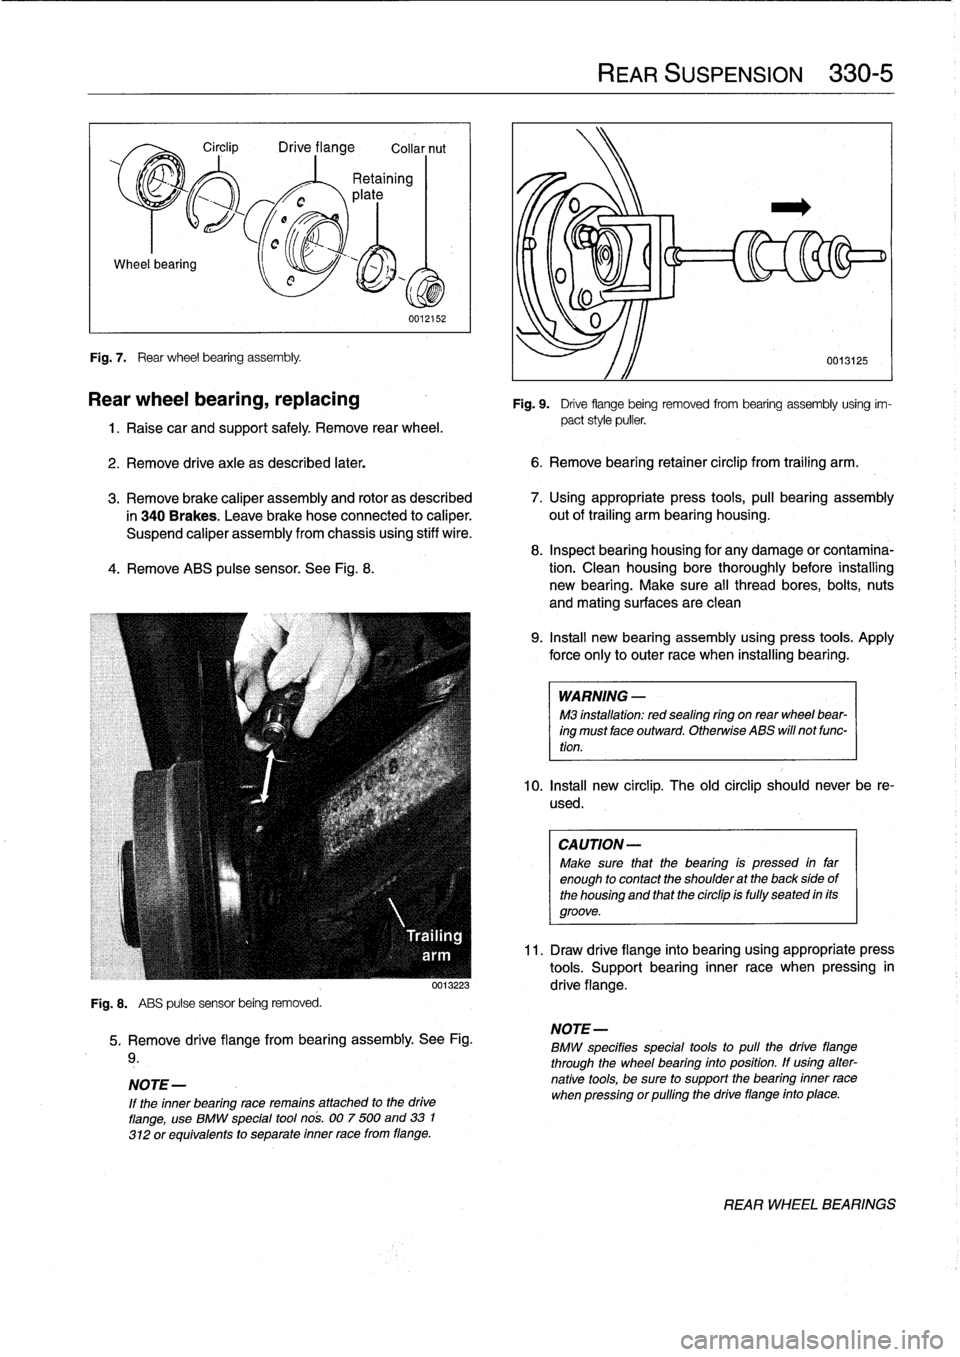 BMW 318i 1995 E36 Owners Guide Wheel
bearing

Fig
.
7
.

	

Rear
wheel
bearing
assembly
.

Circlip

	

Drive
flange

	

Collar
nut

0012152

Rear
wheel
bearing,
replacing

1
.
Raise
car
and
support
safely
.
Remove
rear
wheel
.

2
.